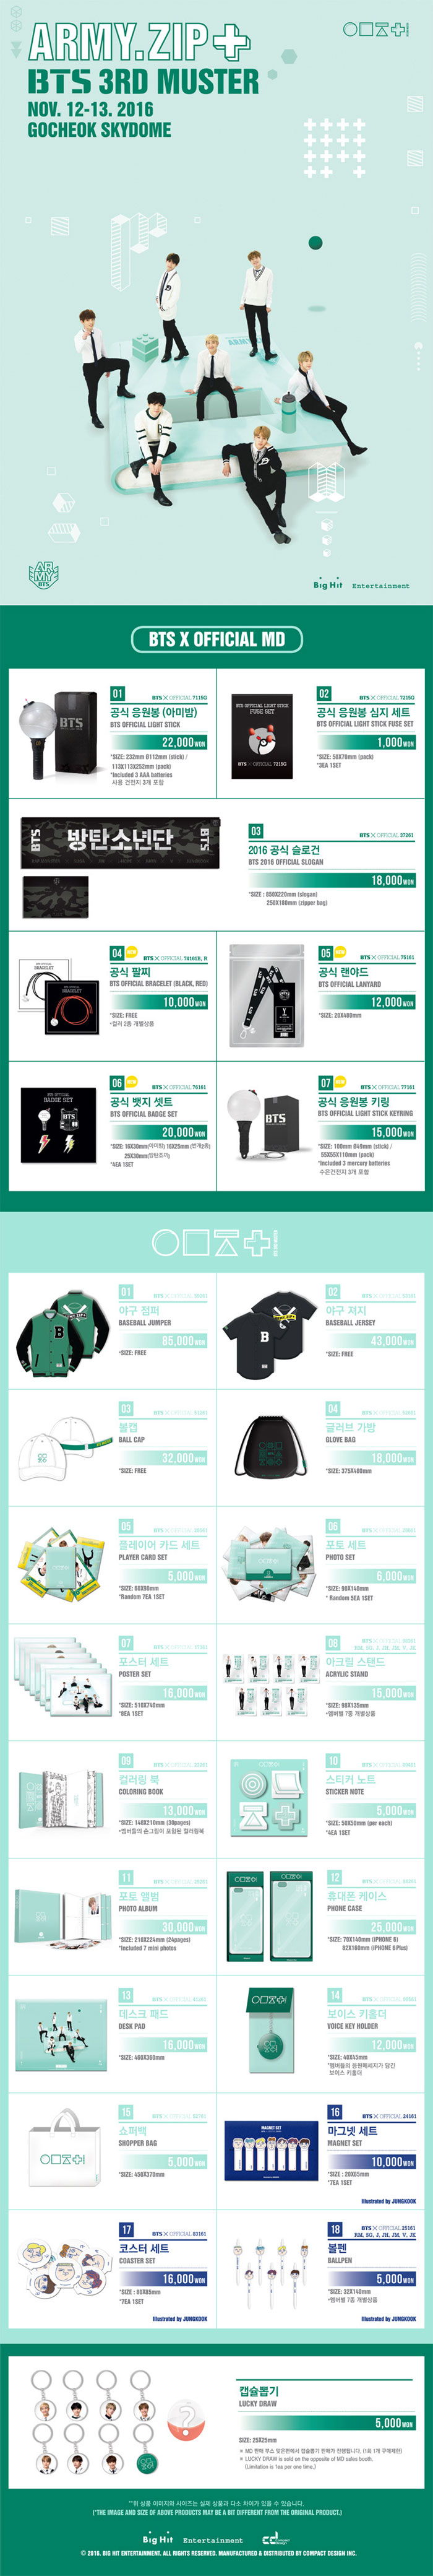 BTS 2016 BTS 3rd MUSTER [ARMY.ZIP+]